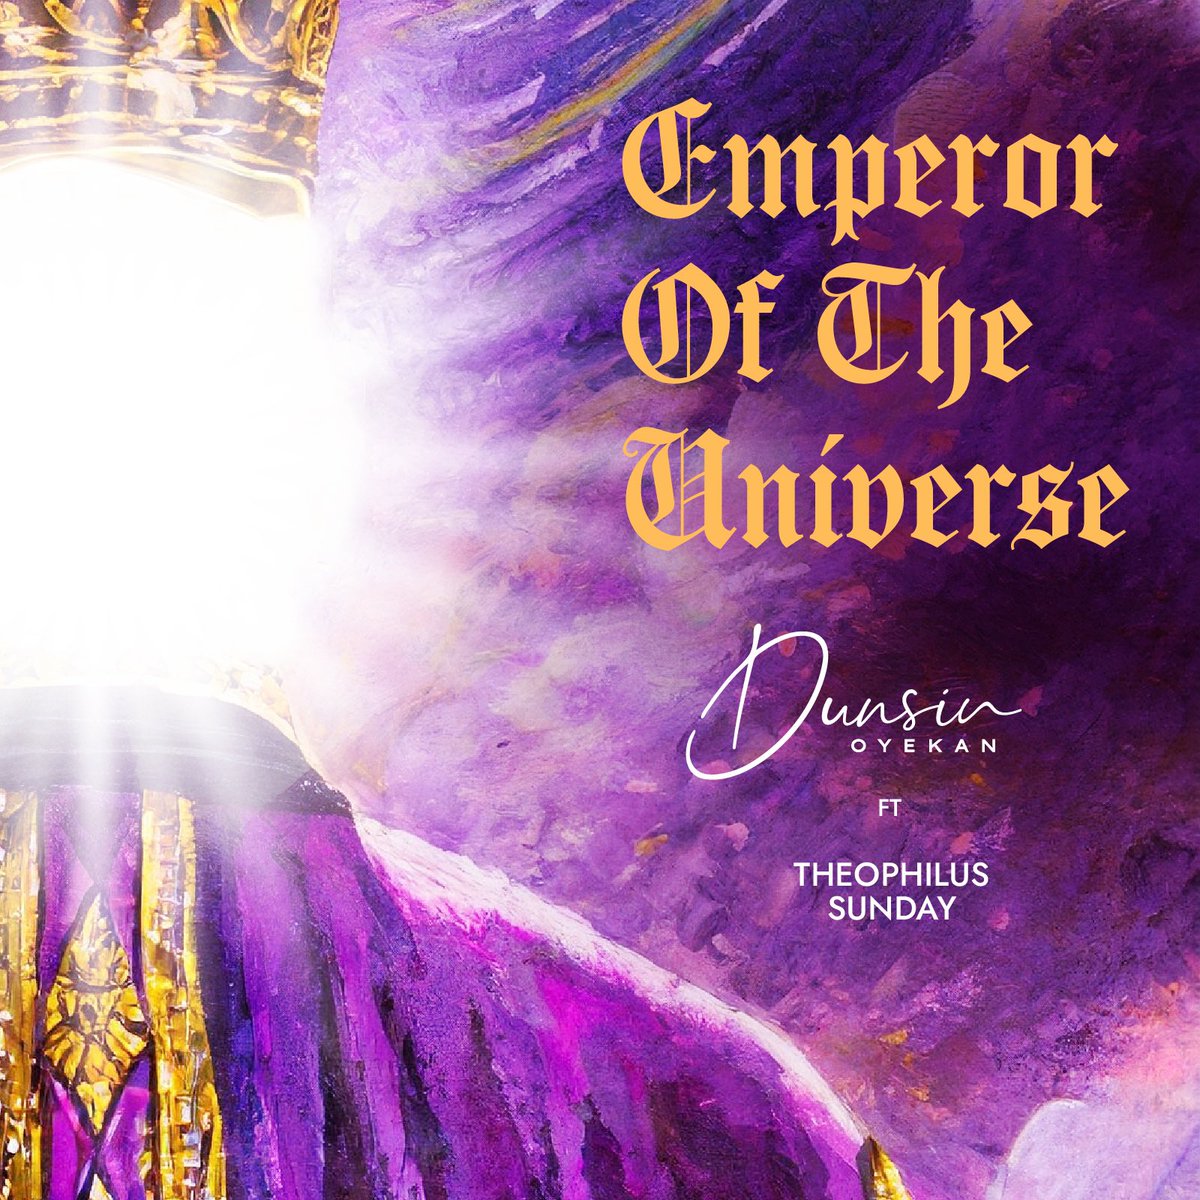 Emperor of the Universe! NOW AVAILABLE ON ALL DIGITAL PLATFORMS! An ode to The Uncreated Creator Our Lord, our Master Our Sovereign King You alone deserve and is worthy of our praise This sound will make you gaze intently into heaven. It will make you pray!